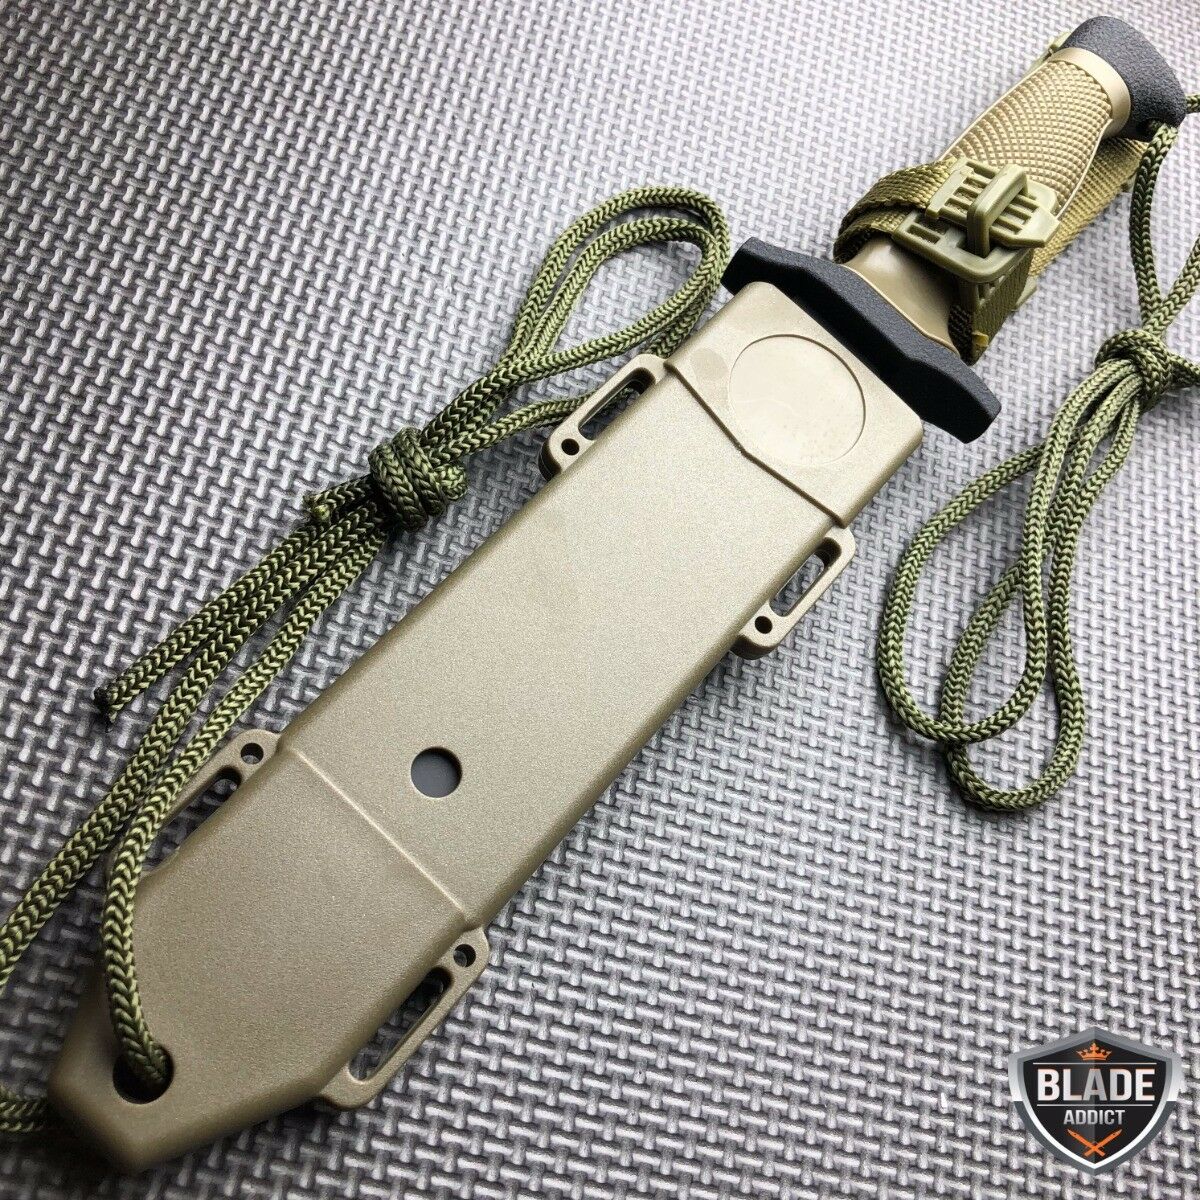 12" Military Survival Bowie Knife